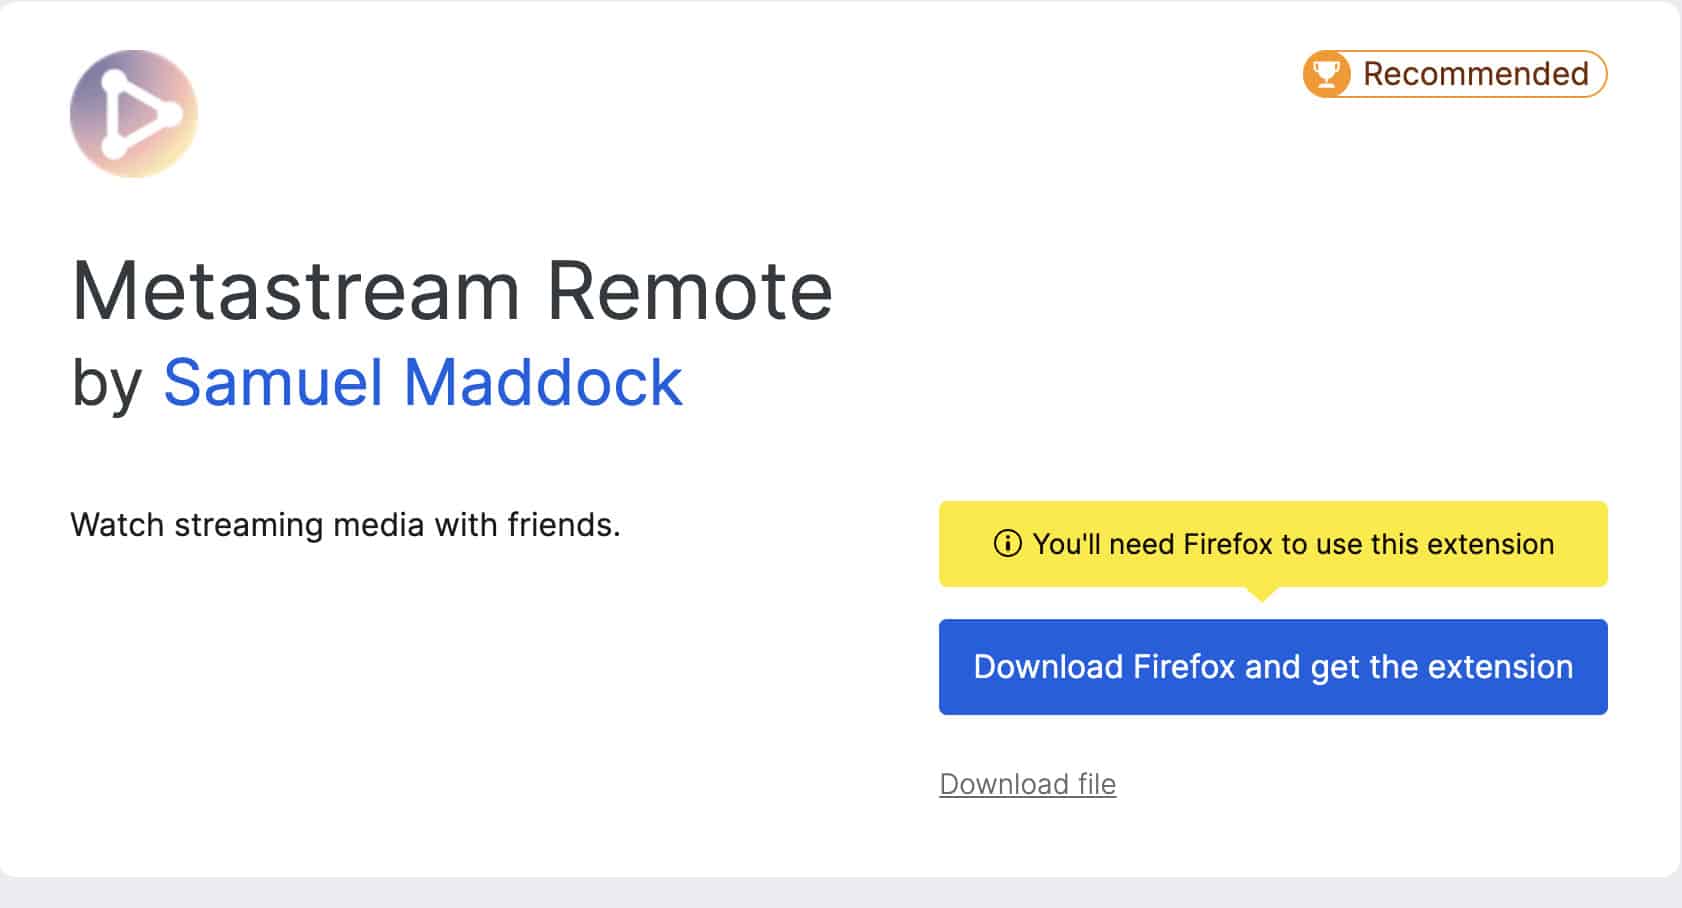 Metastream Remote Netflix extension for FireFox